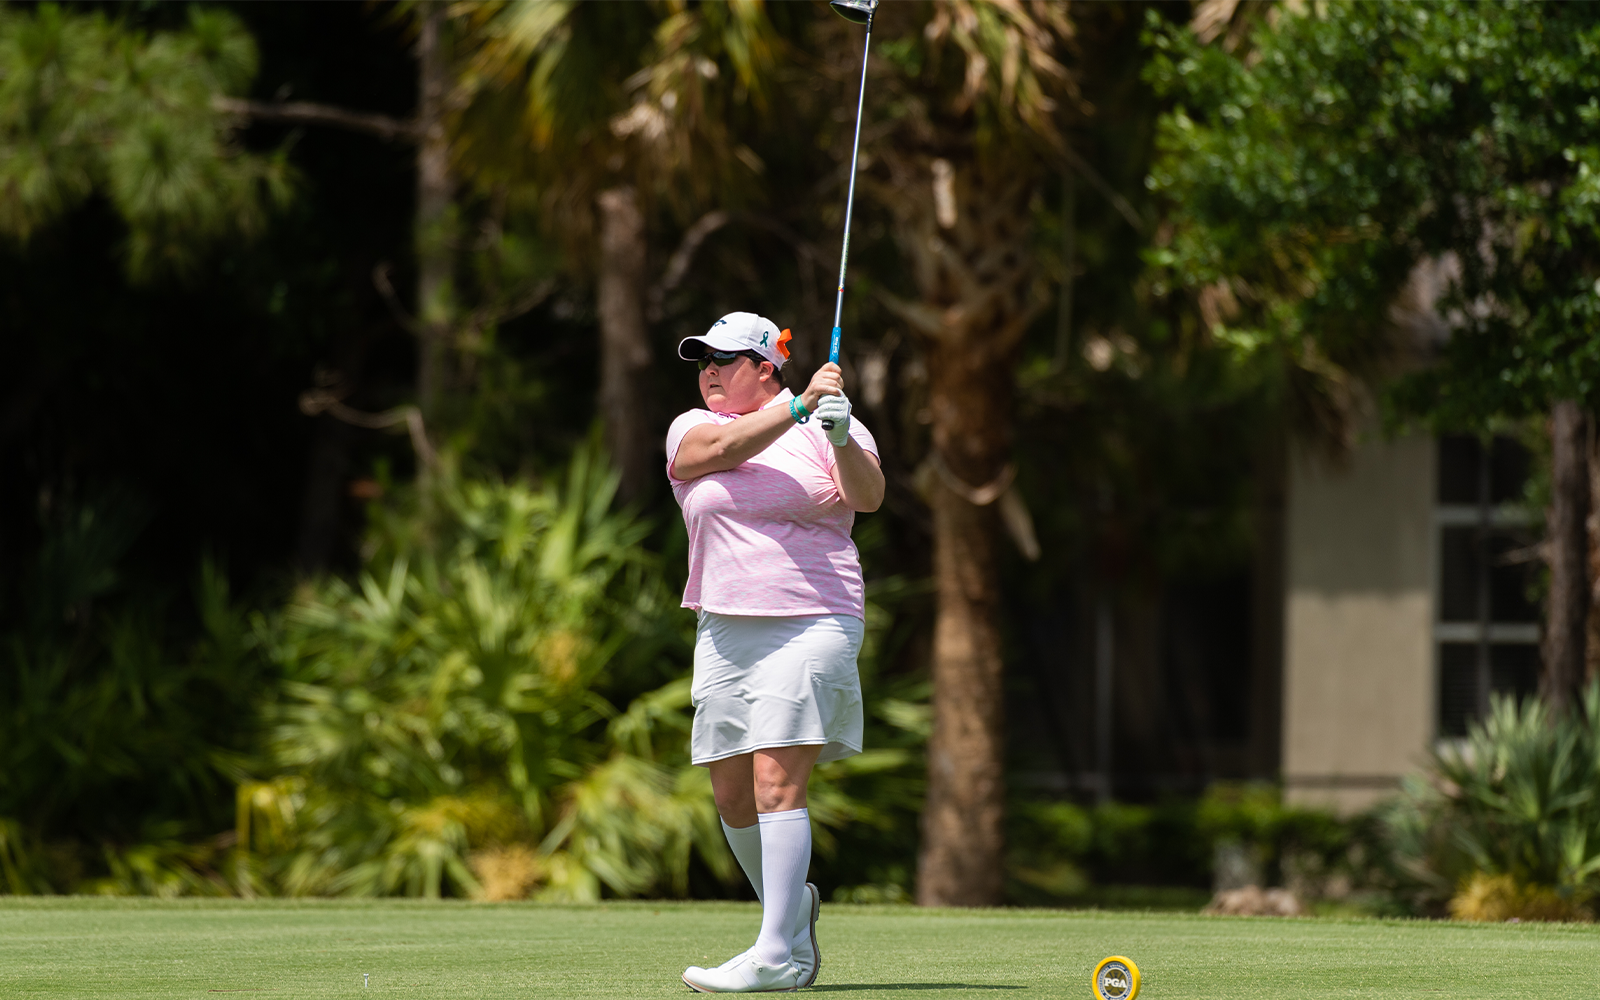 Brittany Kelly hits her tee shot on the fifth hole during the first round for the 54th PGA Professional Championship held at PGA Golf Club on April 25, 2021 in Port St. Lucie, Florida. (Photo by Montana Pritchard/PGA of America)